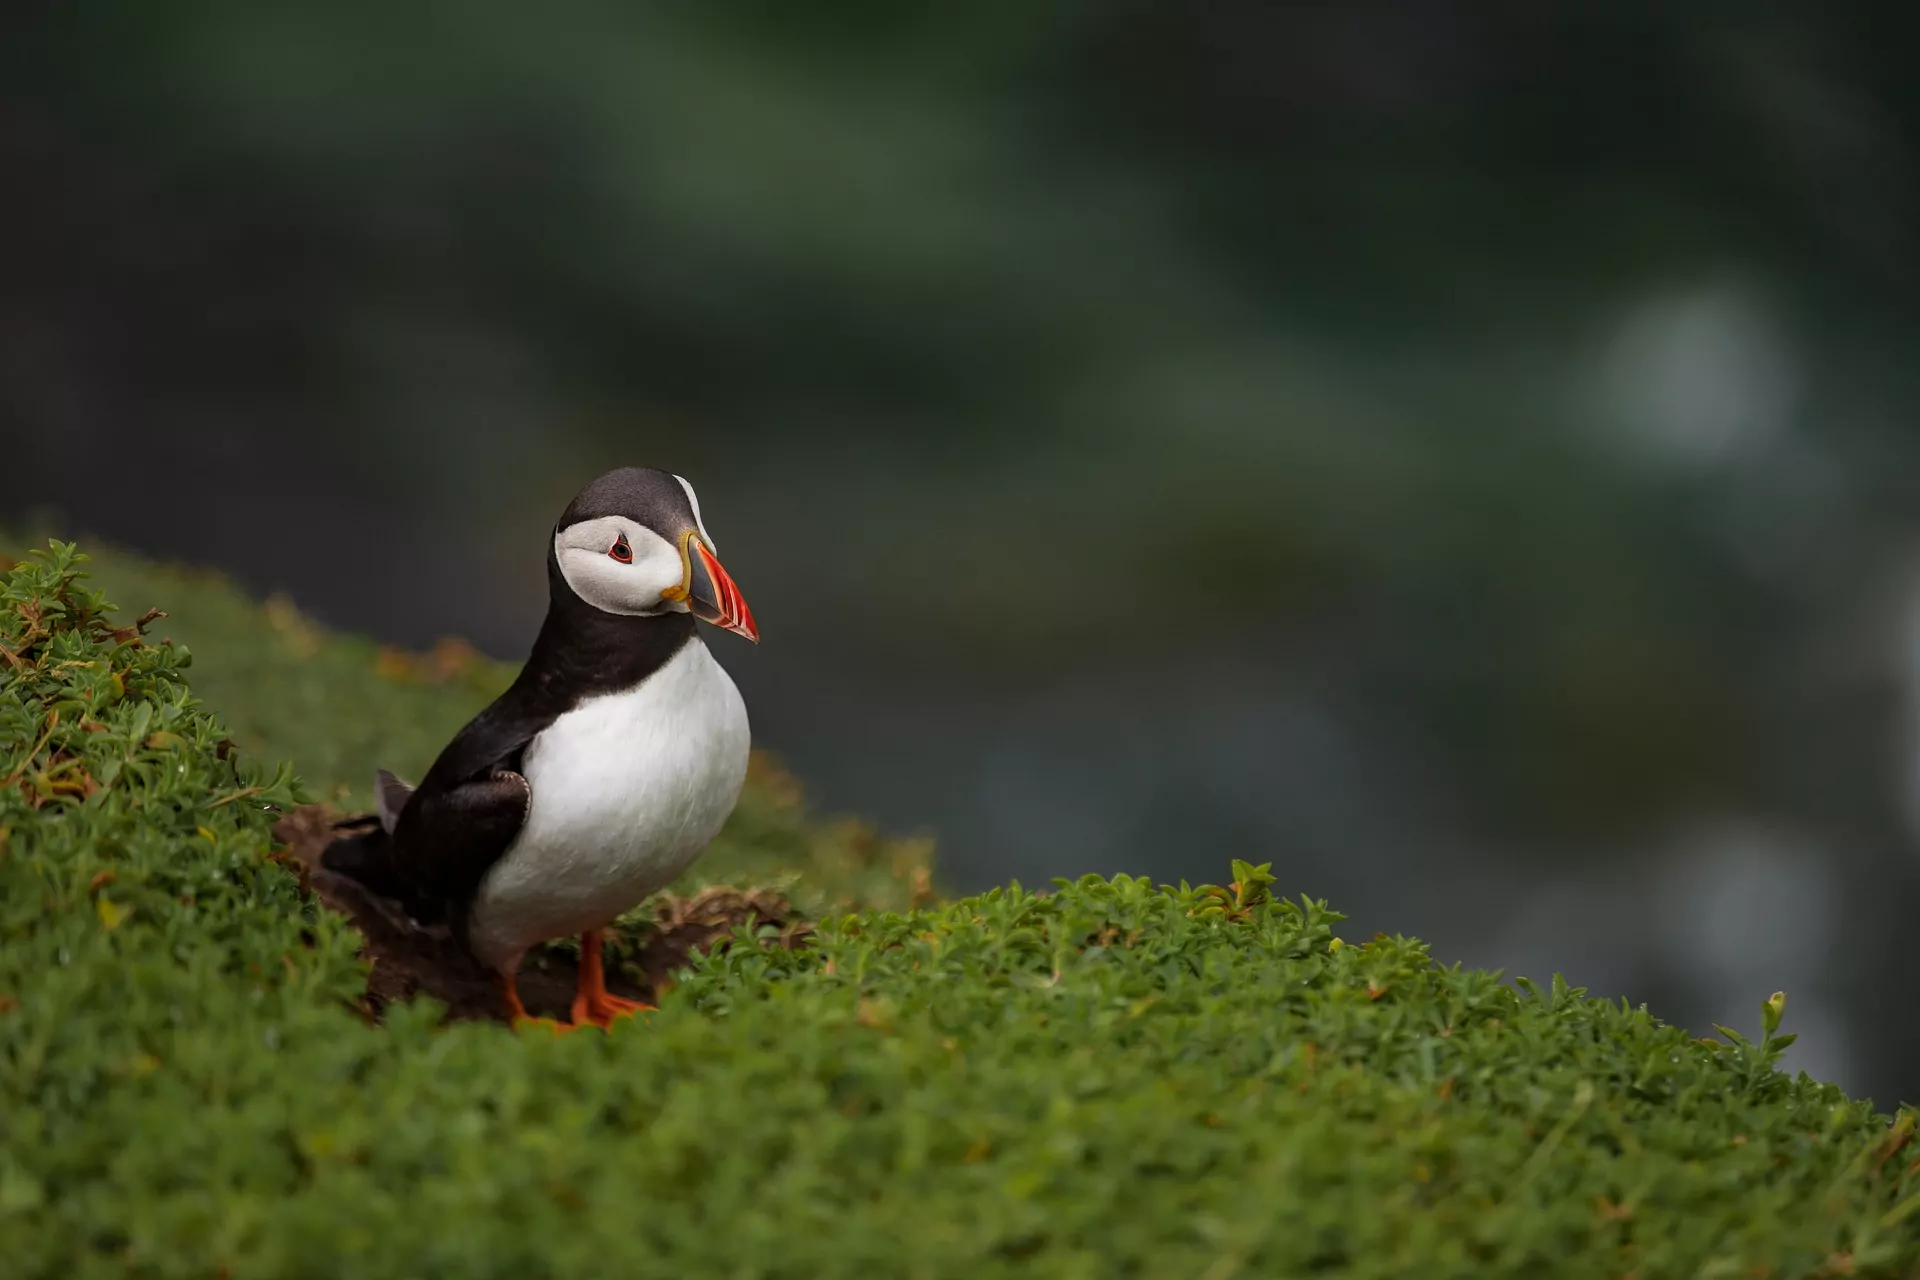 An image of a puffin standing on a cliff. This mid-shot of the lone puffin shows how it is in a remote location.